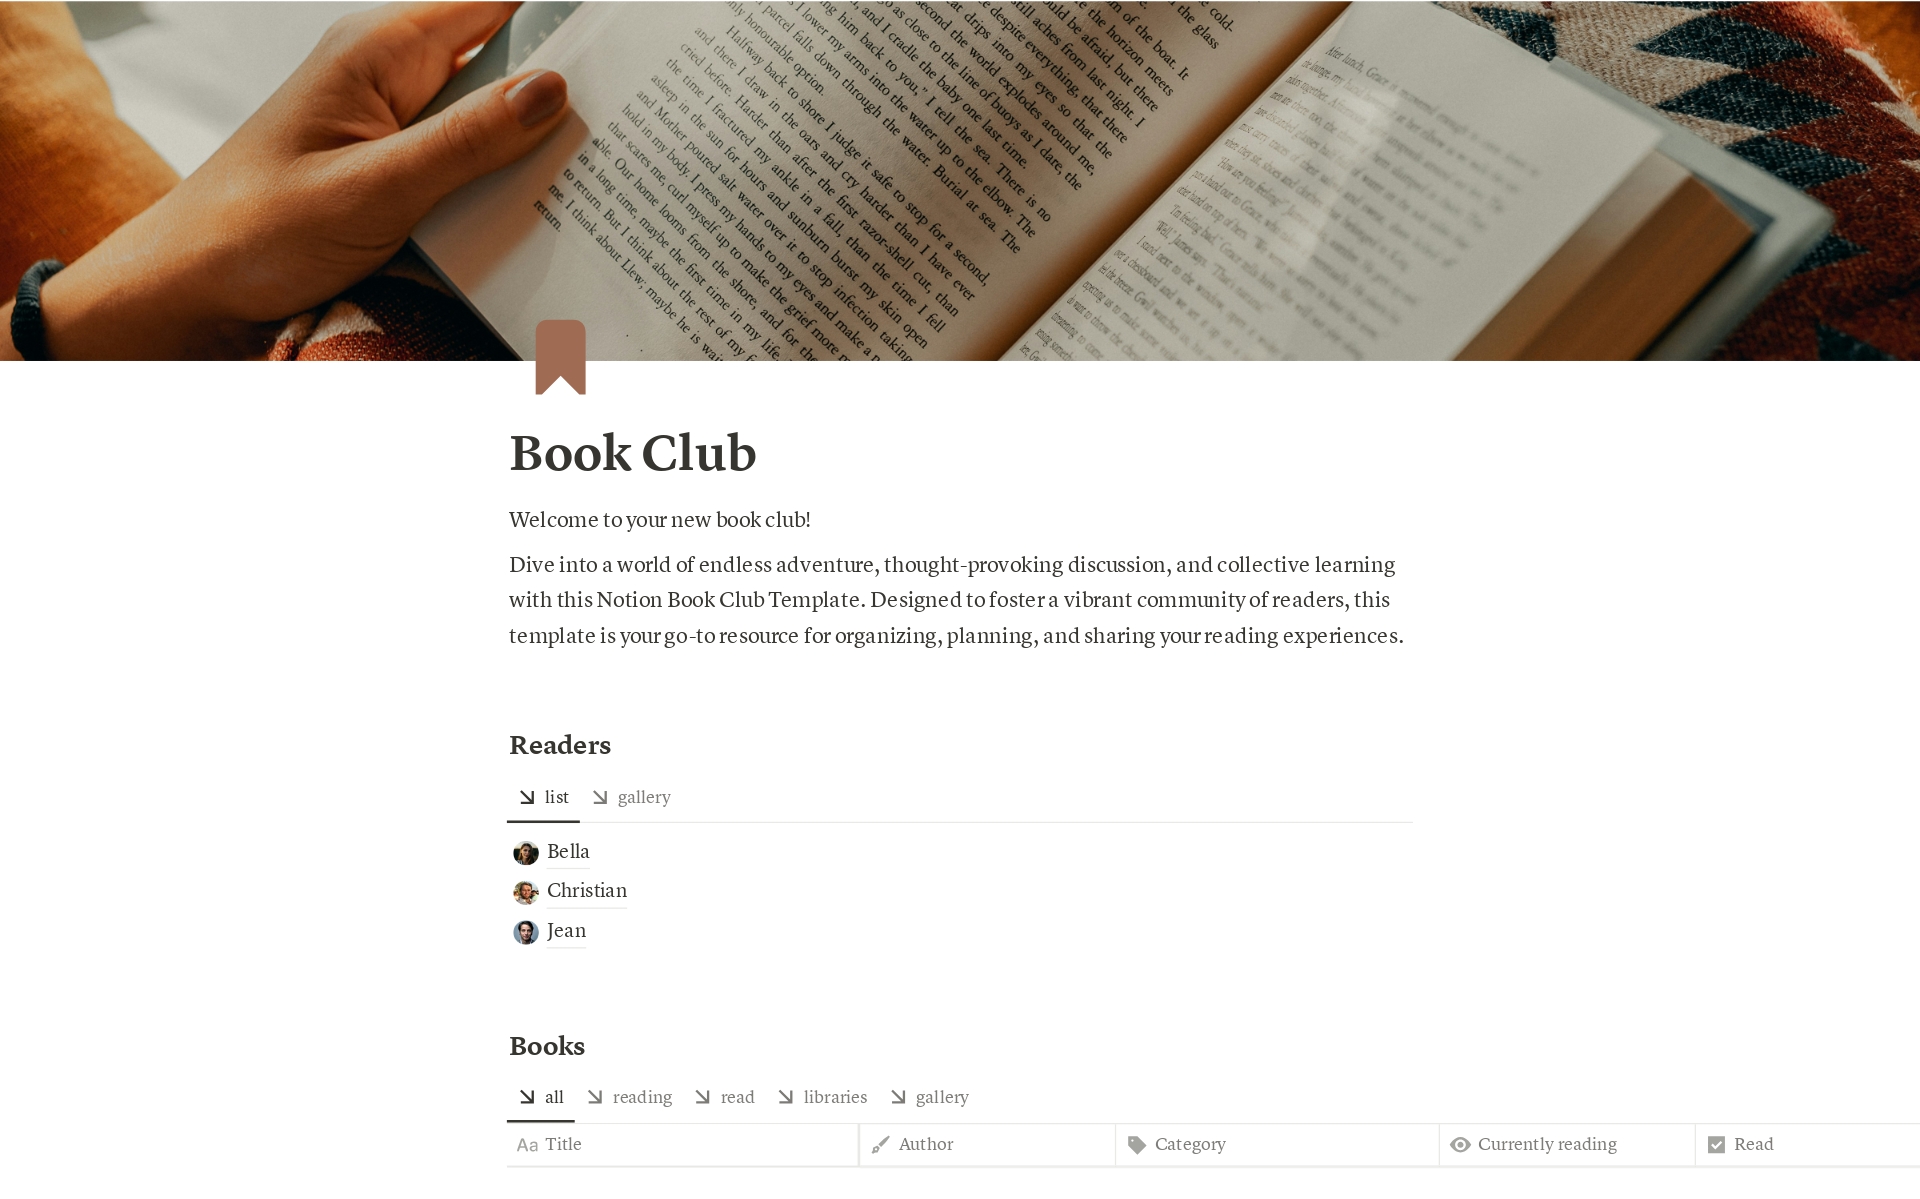 Create and share your very own Book Club on Notion

Gather friends, add your books and start reading together.

This Notion Template gives you what you need to share your passion for reading with like-minded friends and always be up-top-date.

Let's read together!